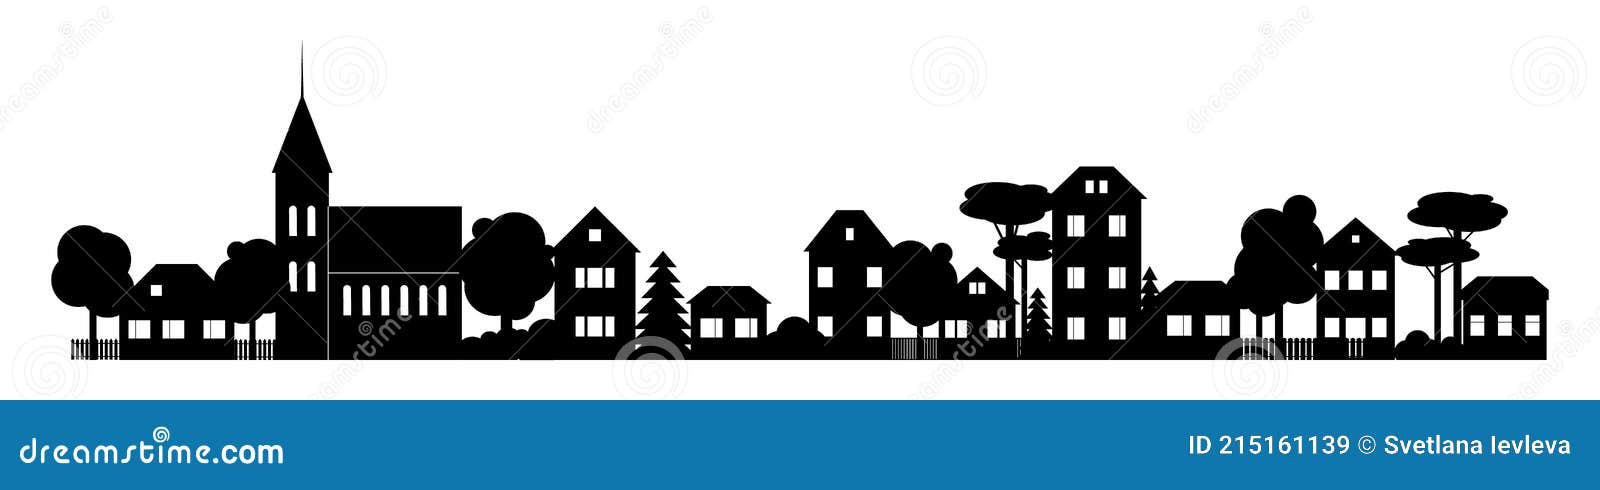 small town silhouette skyline horizontal banner black and white 